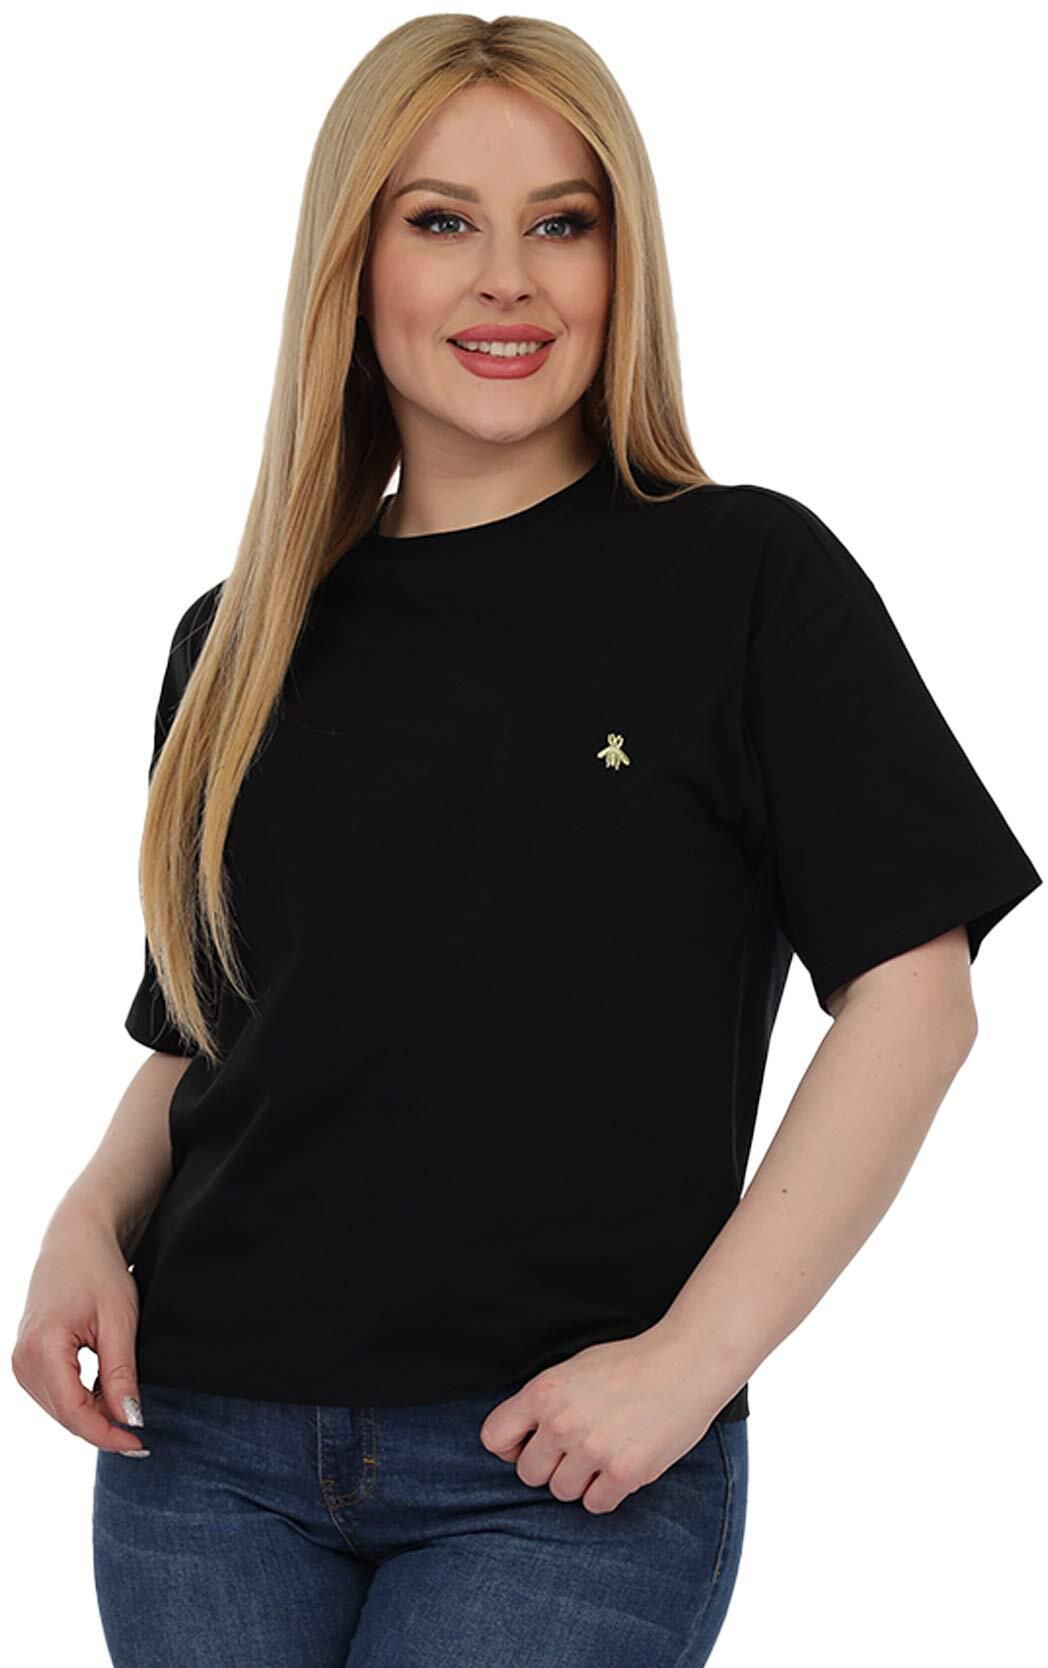 La Collection T-Shirt for Women - Small - Black